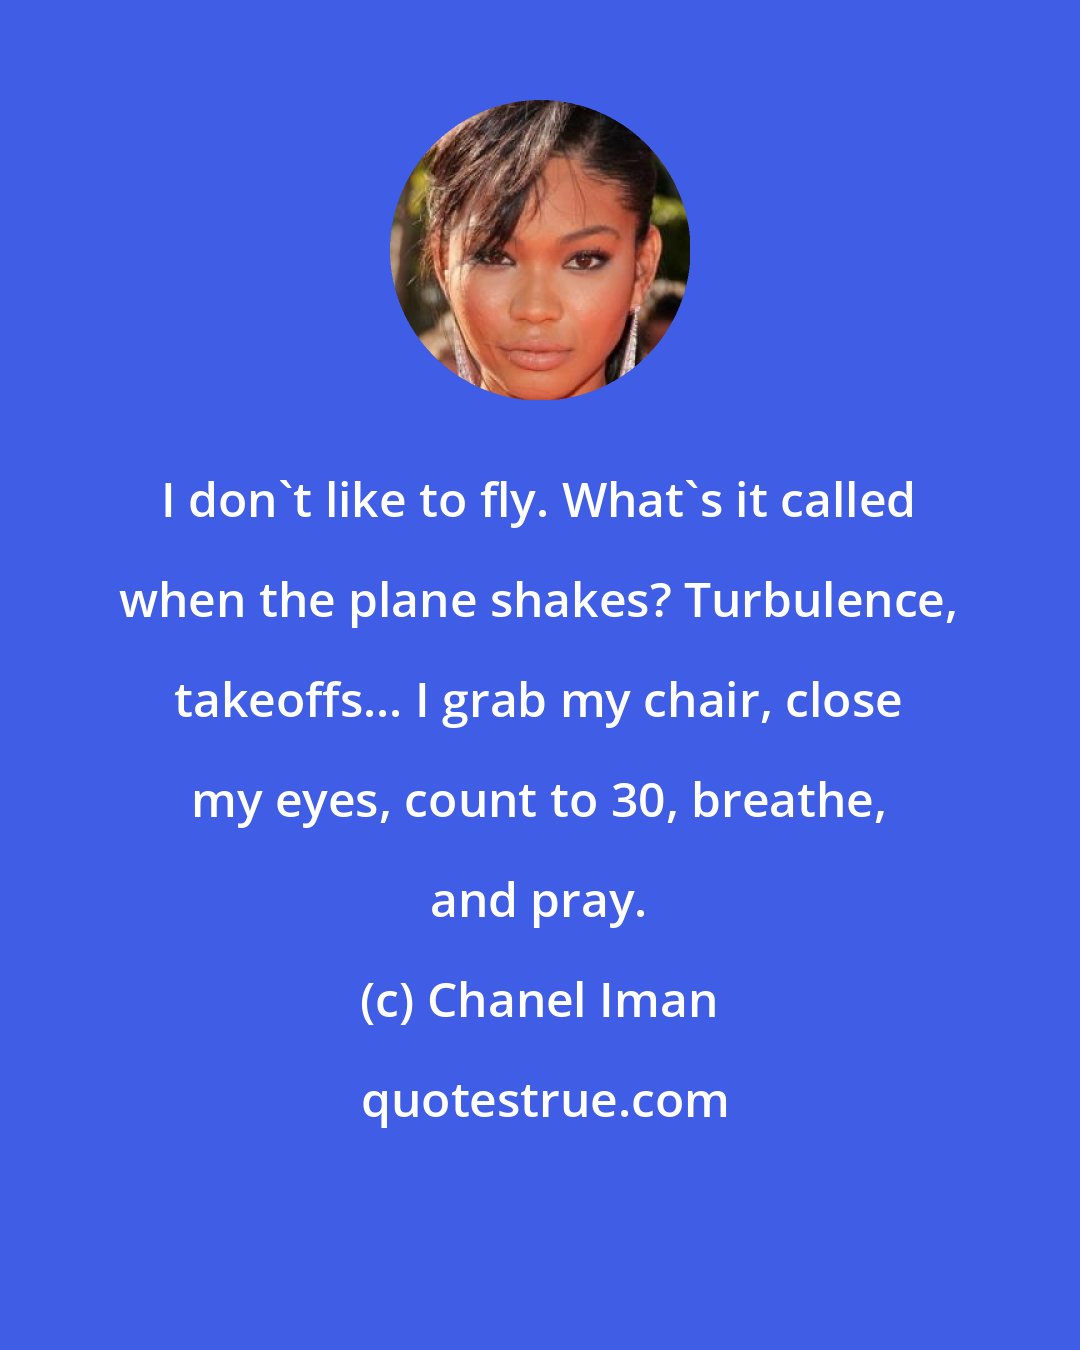 Chanel Iman: I don't like to fly. What's it called when the plane shakes? Turbulence, takeoffs... I grab my chair, close my eyes, count to 30, breathe, and pray.